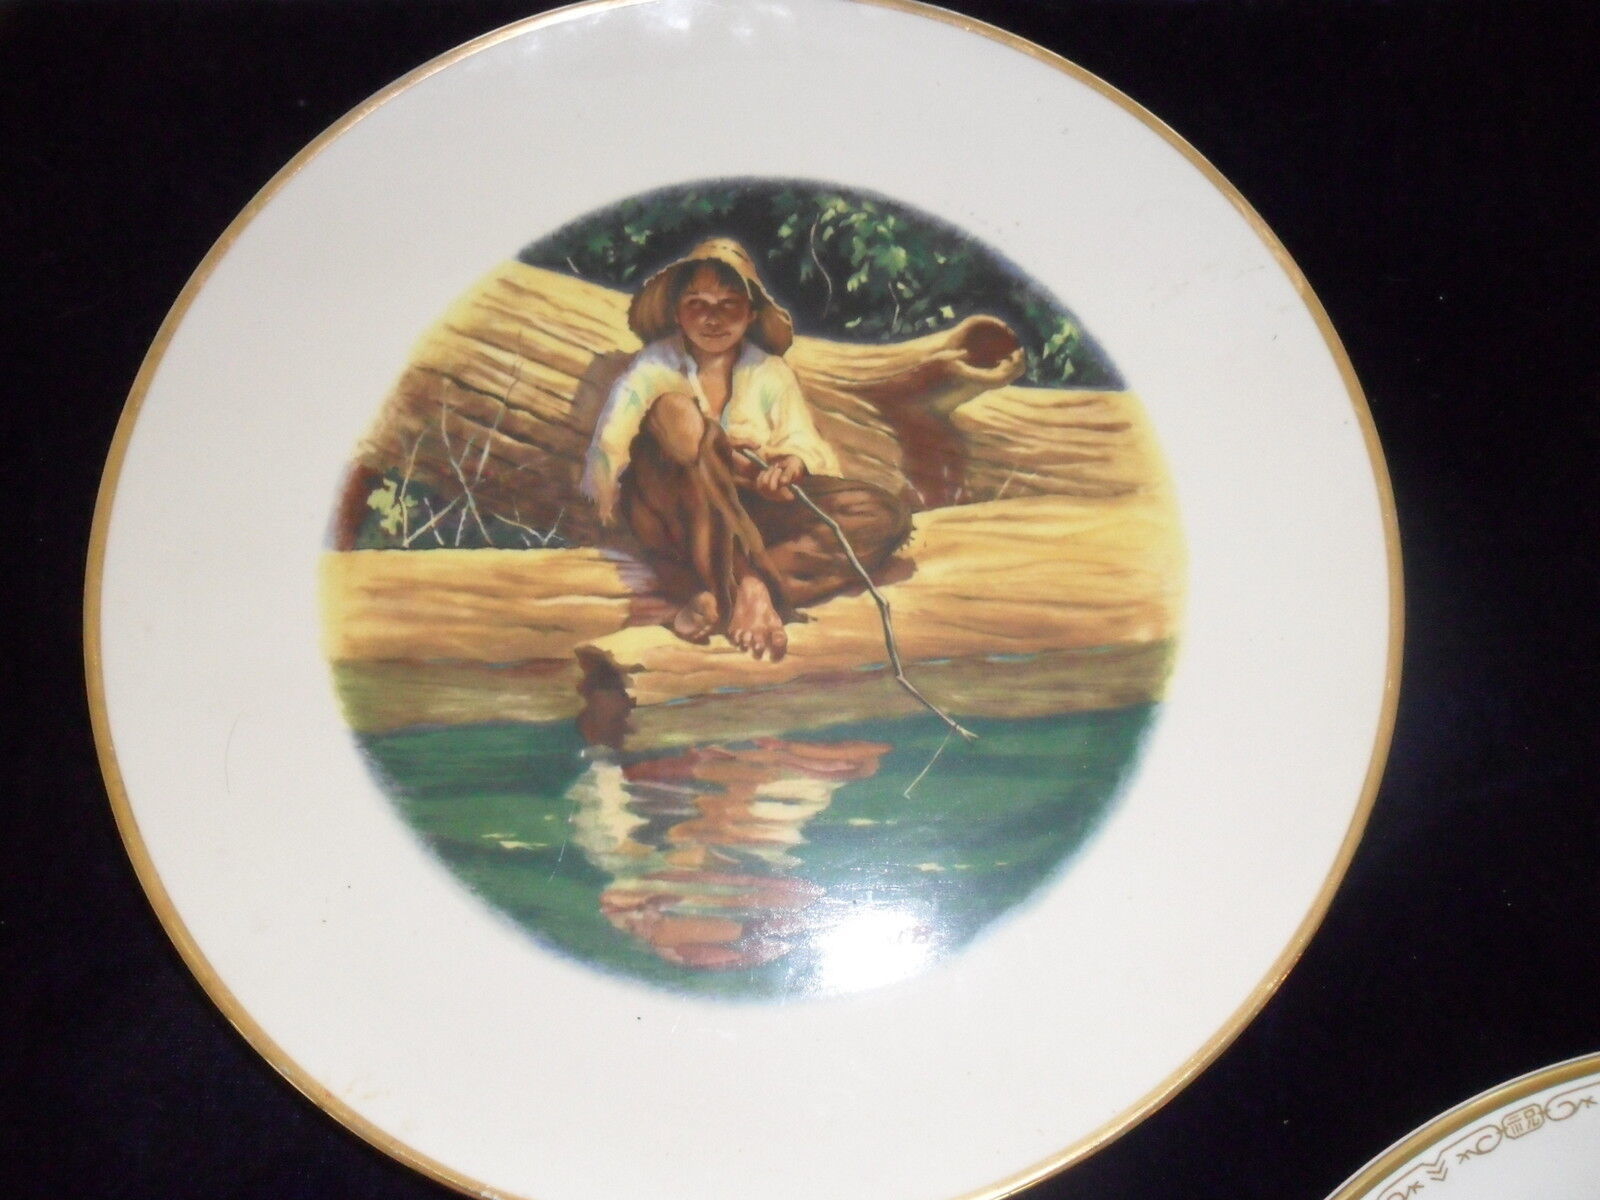 Primary image for Mark Twain Collector Plate by Ridgwood